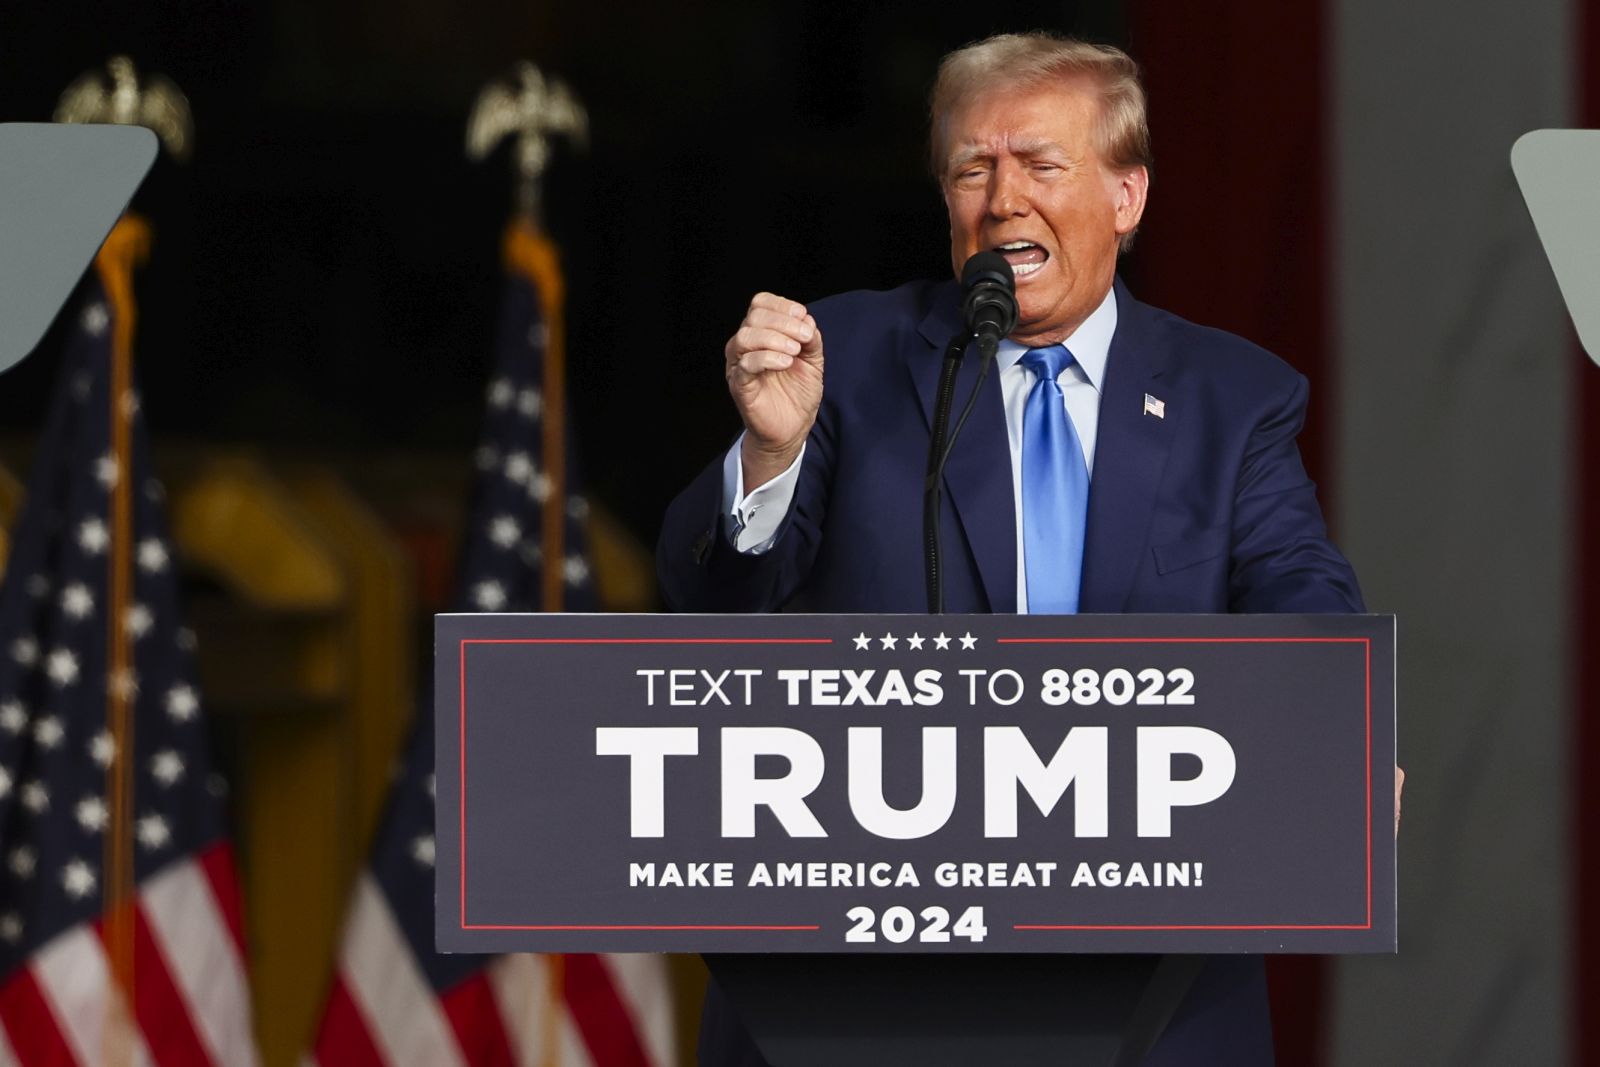 epa10955471 Former US President Donald Trump speaks  during a Trendsetter Engineering event in Houston, Texas, USA, 02 November 2023. This is another stop during Donald Trump's election campaign tour for presidency in 2024.  EPA/ADAM DAVIS